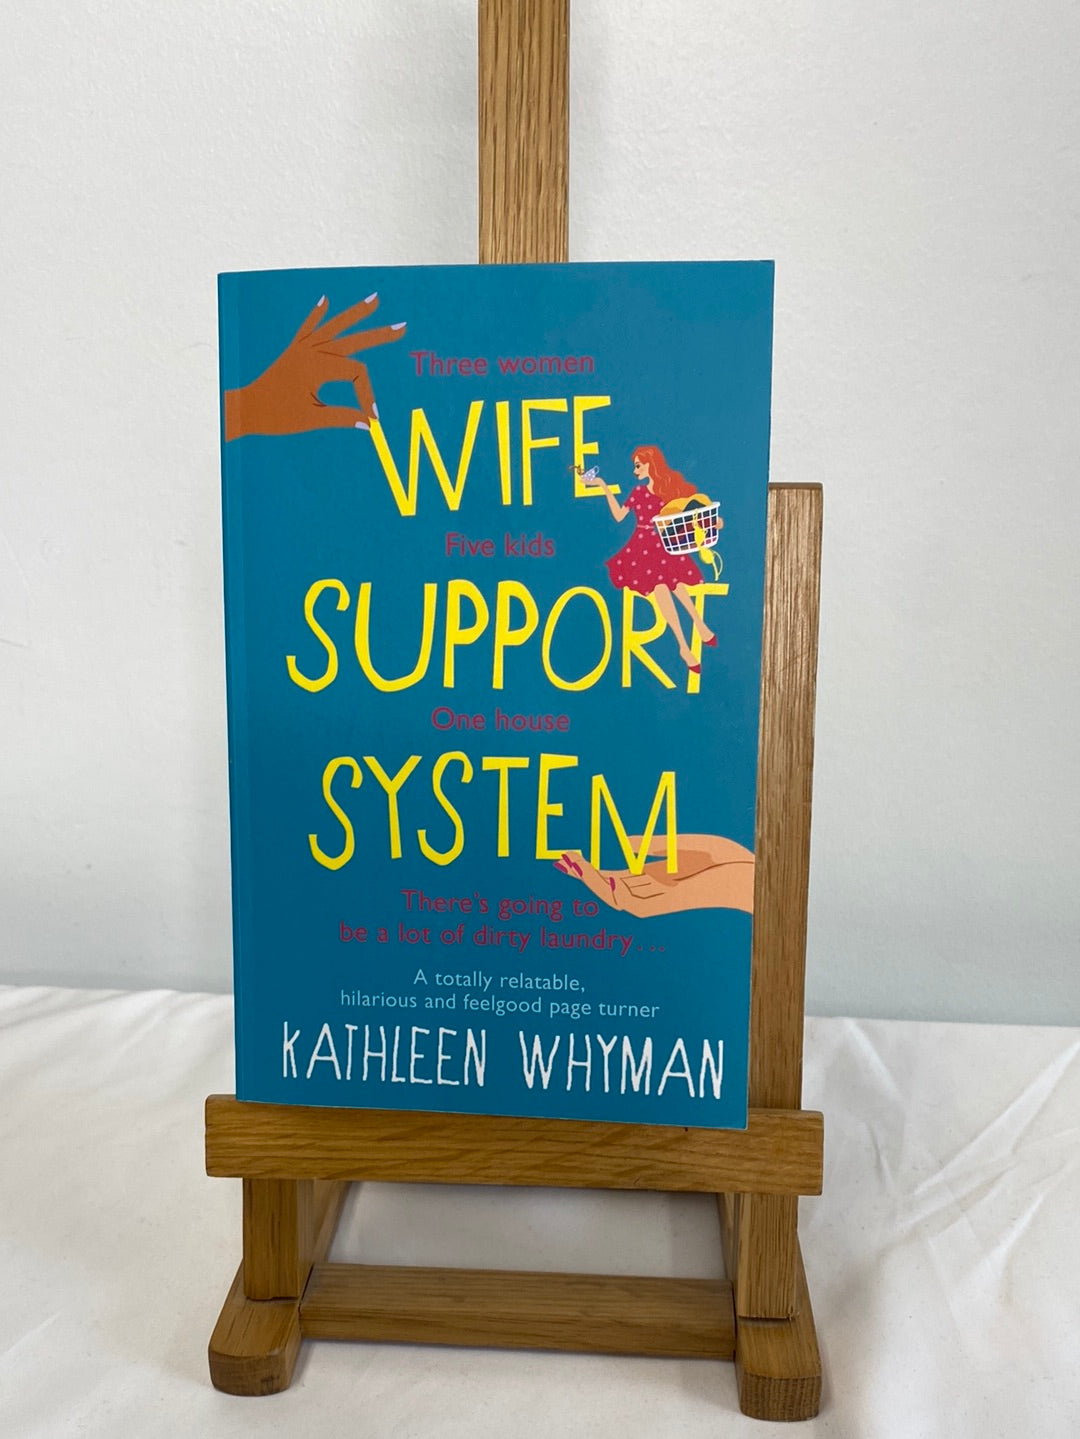 Wife Support System - Kathleen Whyman